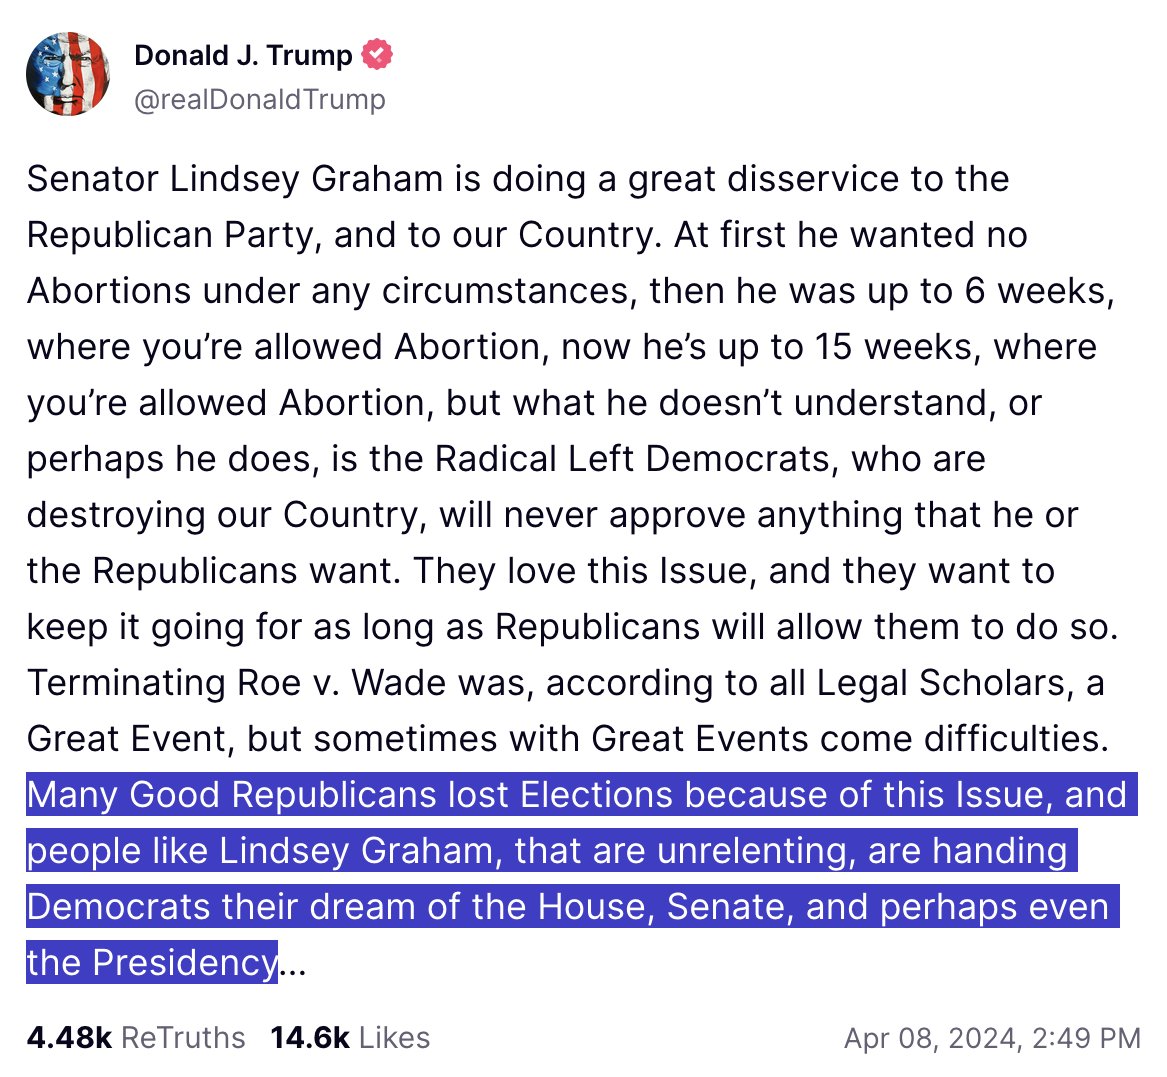 Under-appreciated moment in this week's abortion drama: rare admission from Trump that he and his party could potentially lose the 2024 election because of a legitimate policy issue, rather than the longstanding theft/rigged go-to.